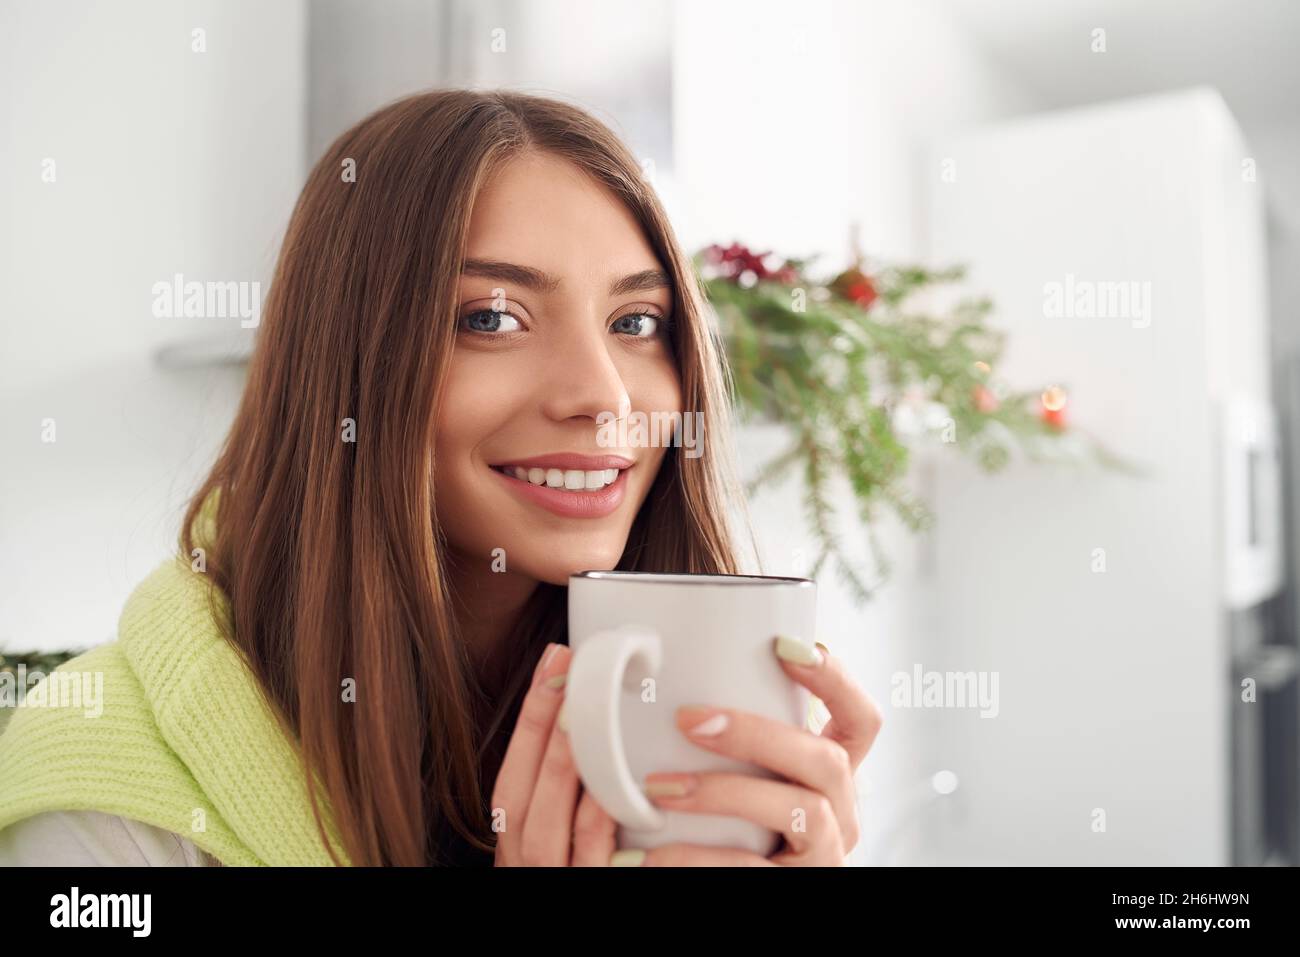 Smiling pretty brunette holding cup in bright room with Christmas decoration. Concept of holiday at home. Stock Photo